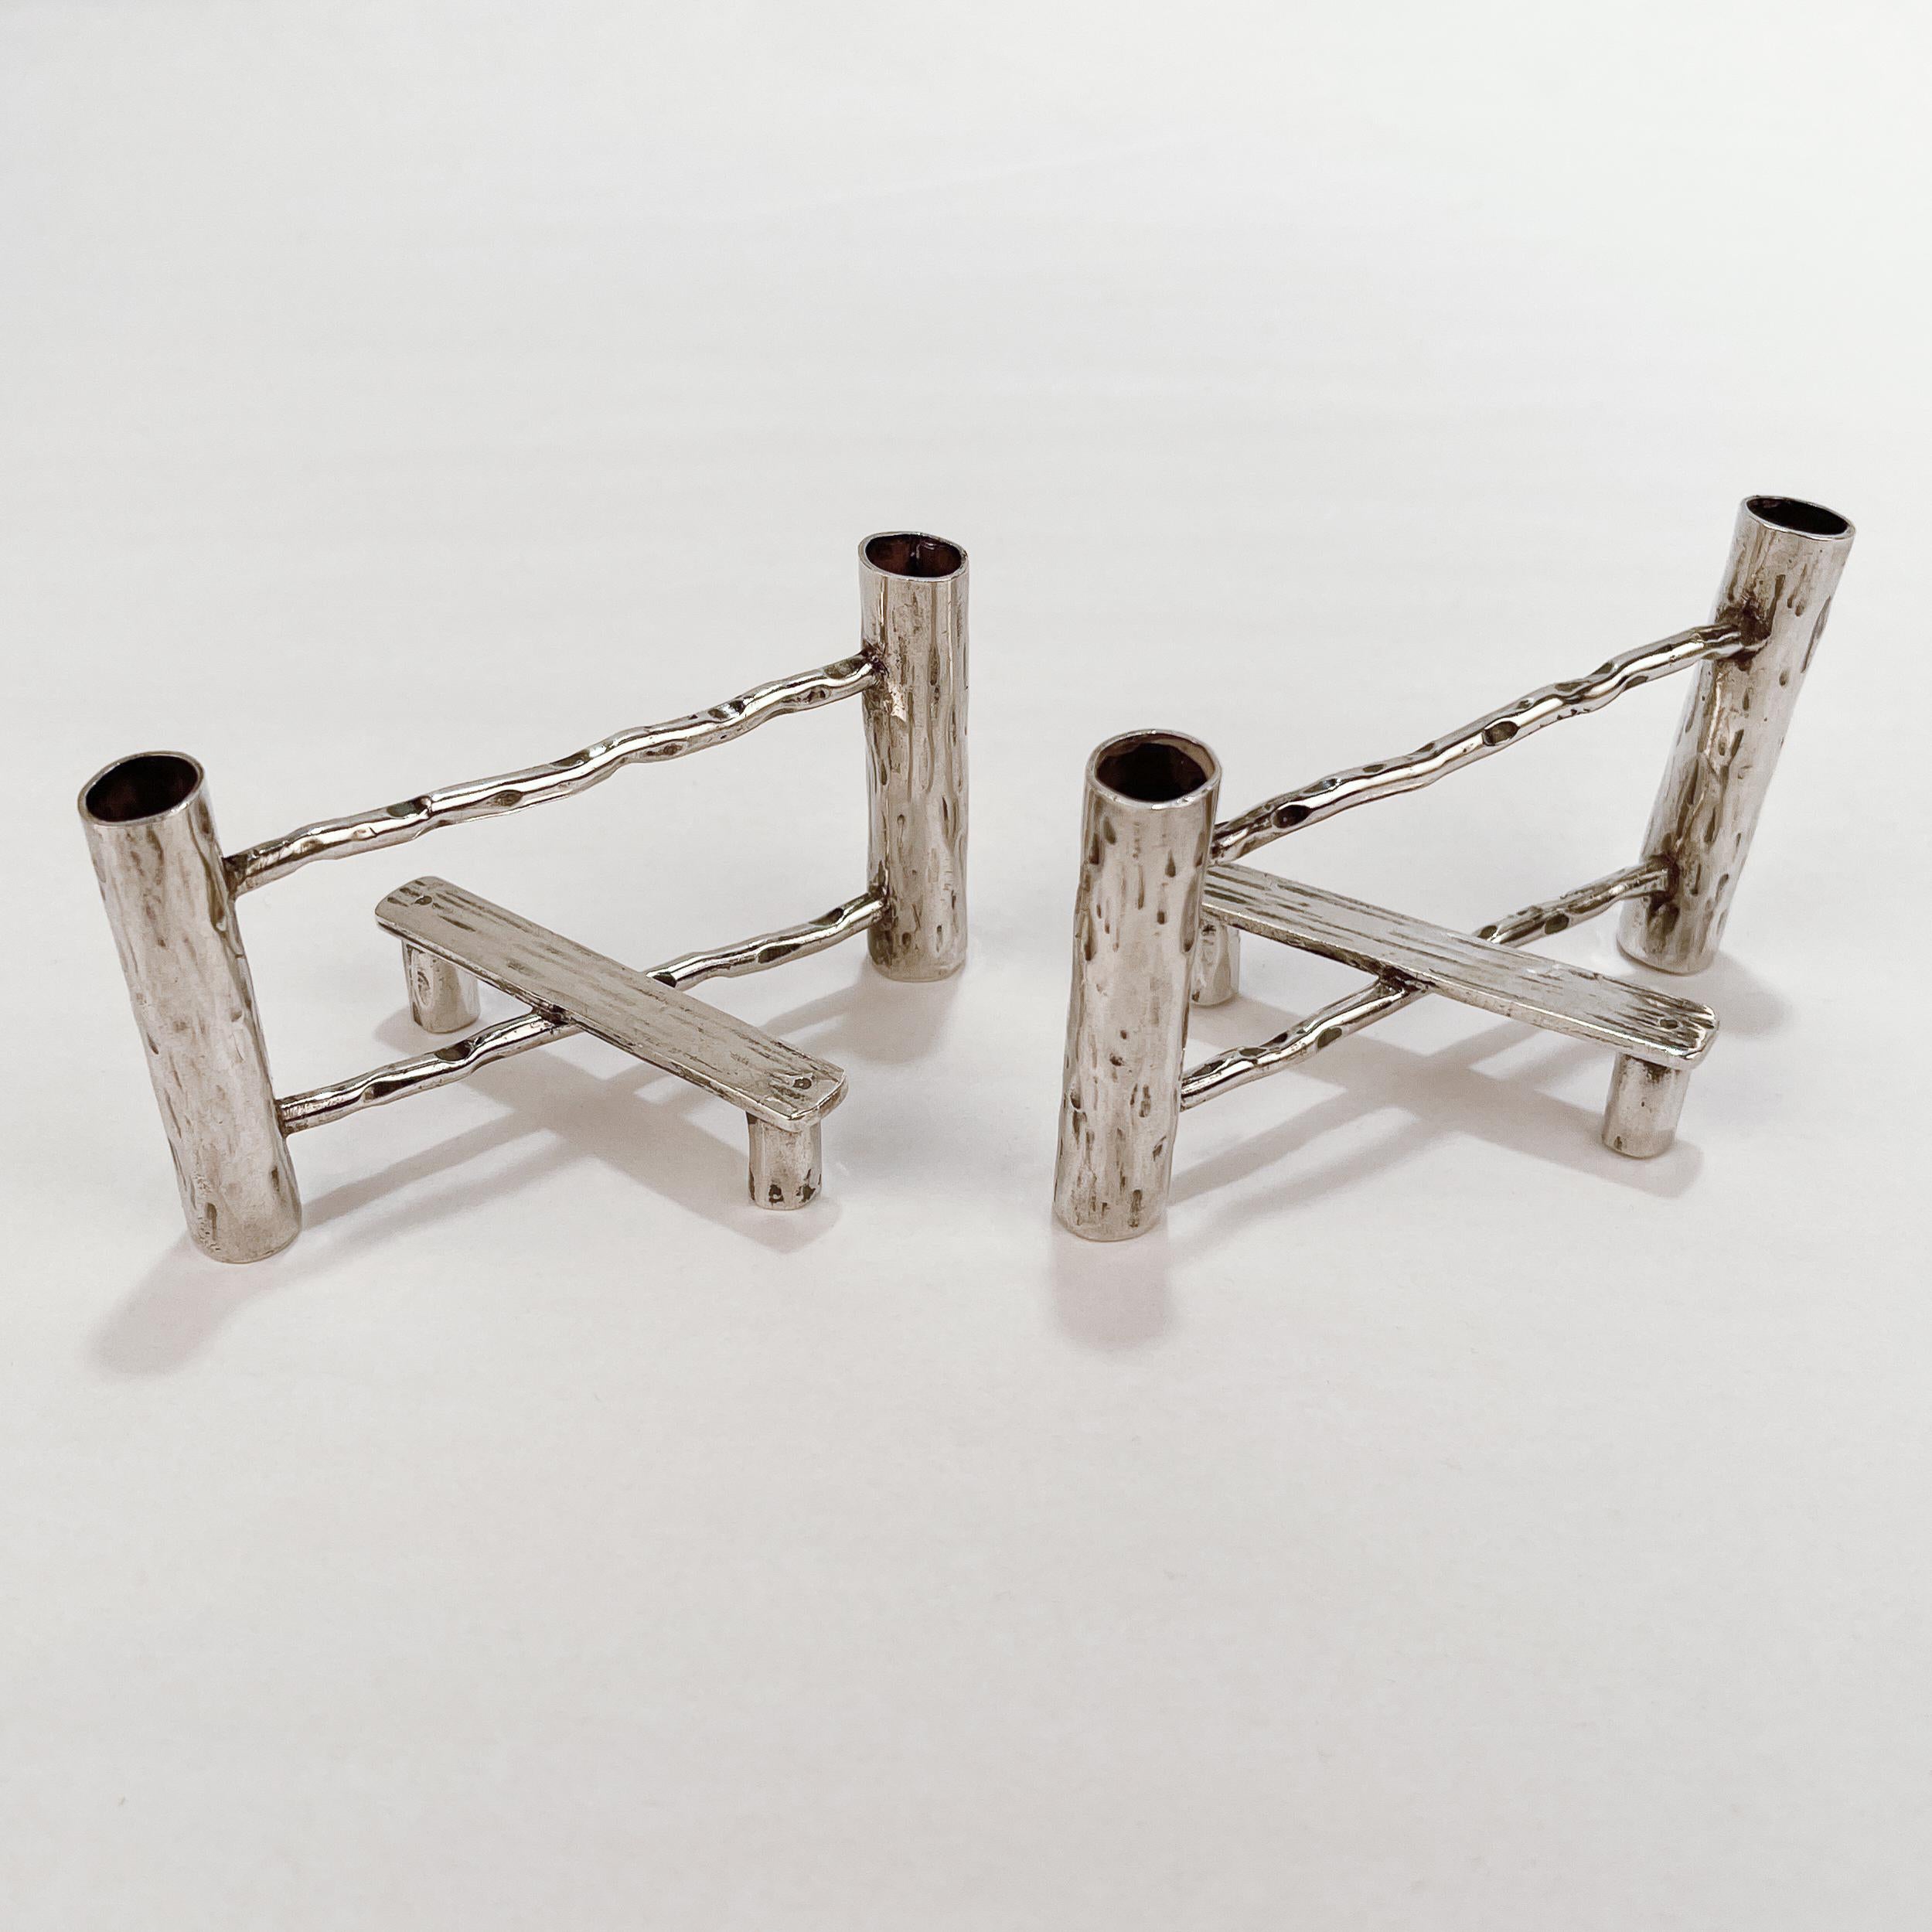 A fine pair of antique English sterling silver candle holders or small bud vases.

Made by J E Bushell of Birmingham, England. 

In the form of 2 split rail fences with attached benches. 

We assume that these function as taper-stick candle holders